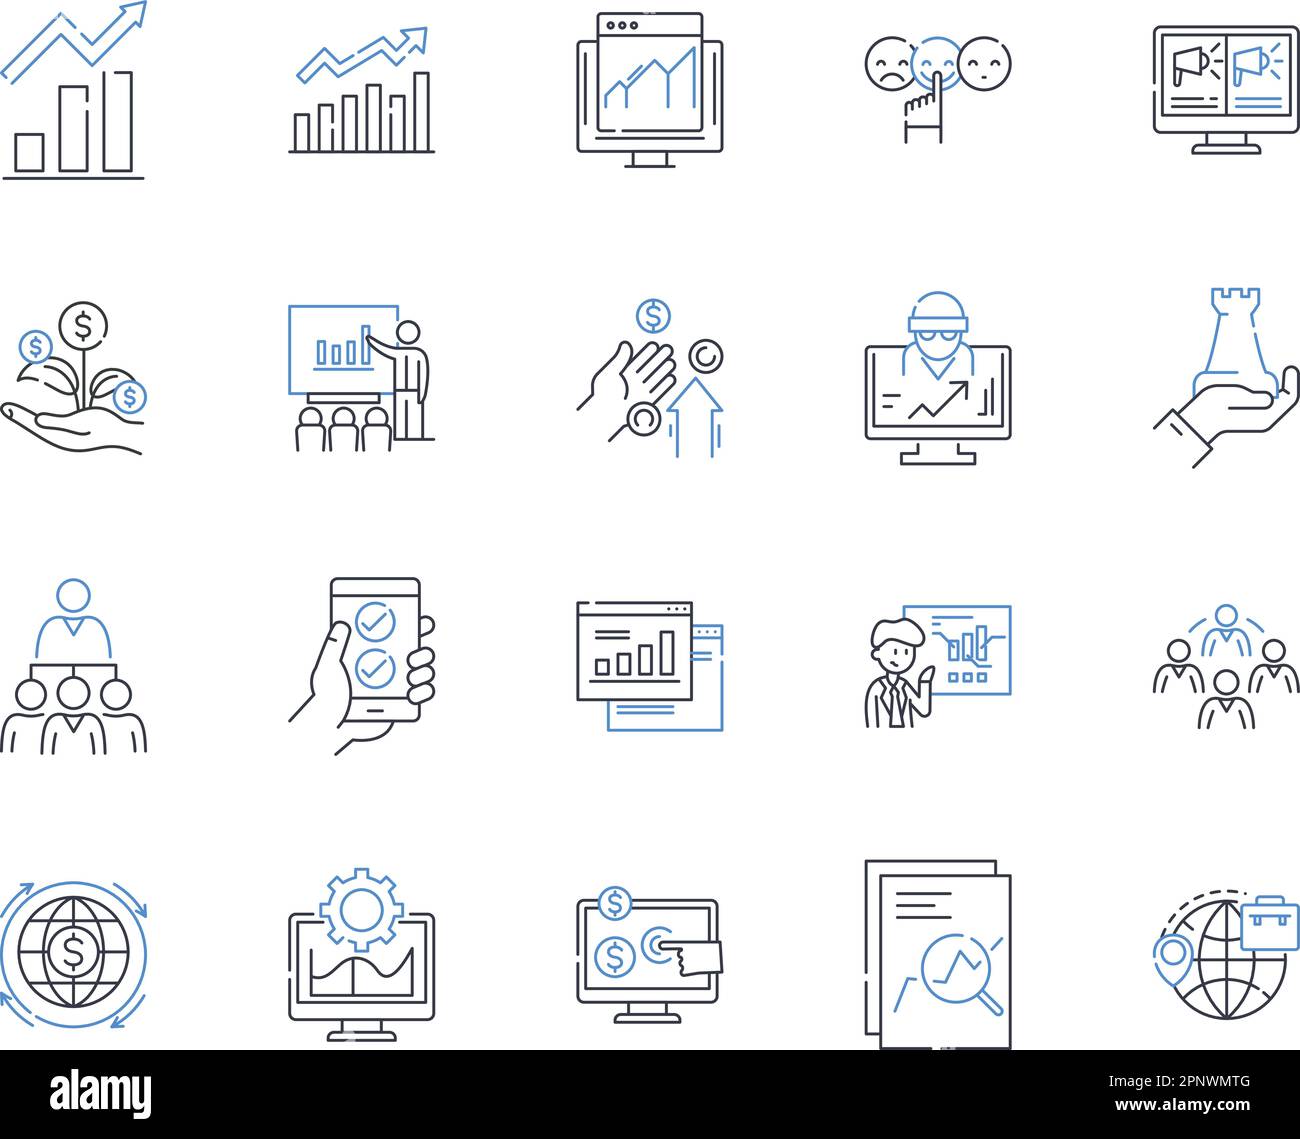 Market development line icons collection. Expansion, Penetration, Growth, Diversification, Segmentation, Opportunities, Innovation vector and linear Stock Vector